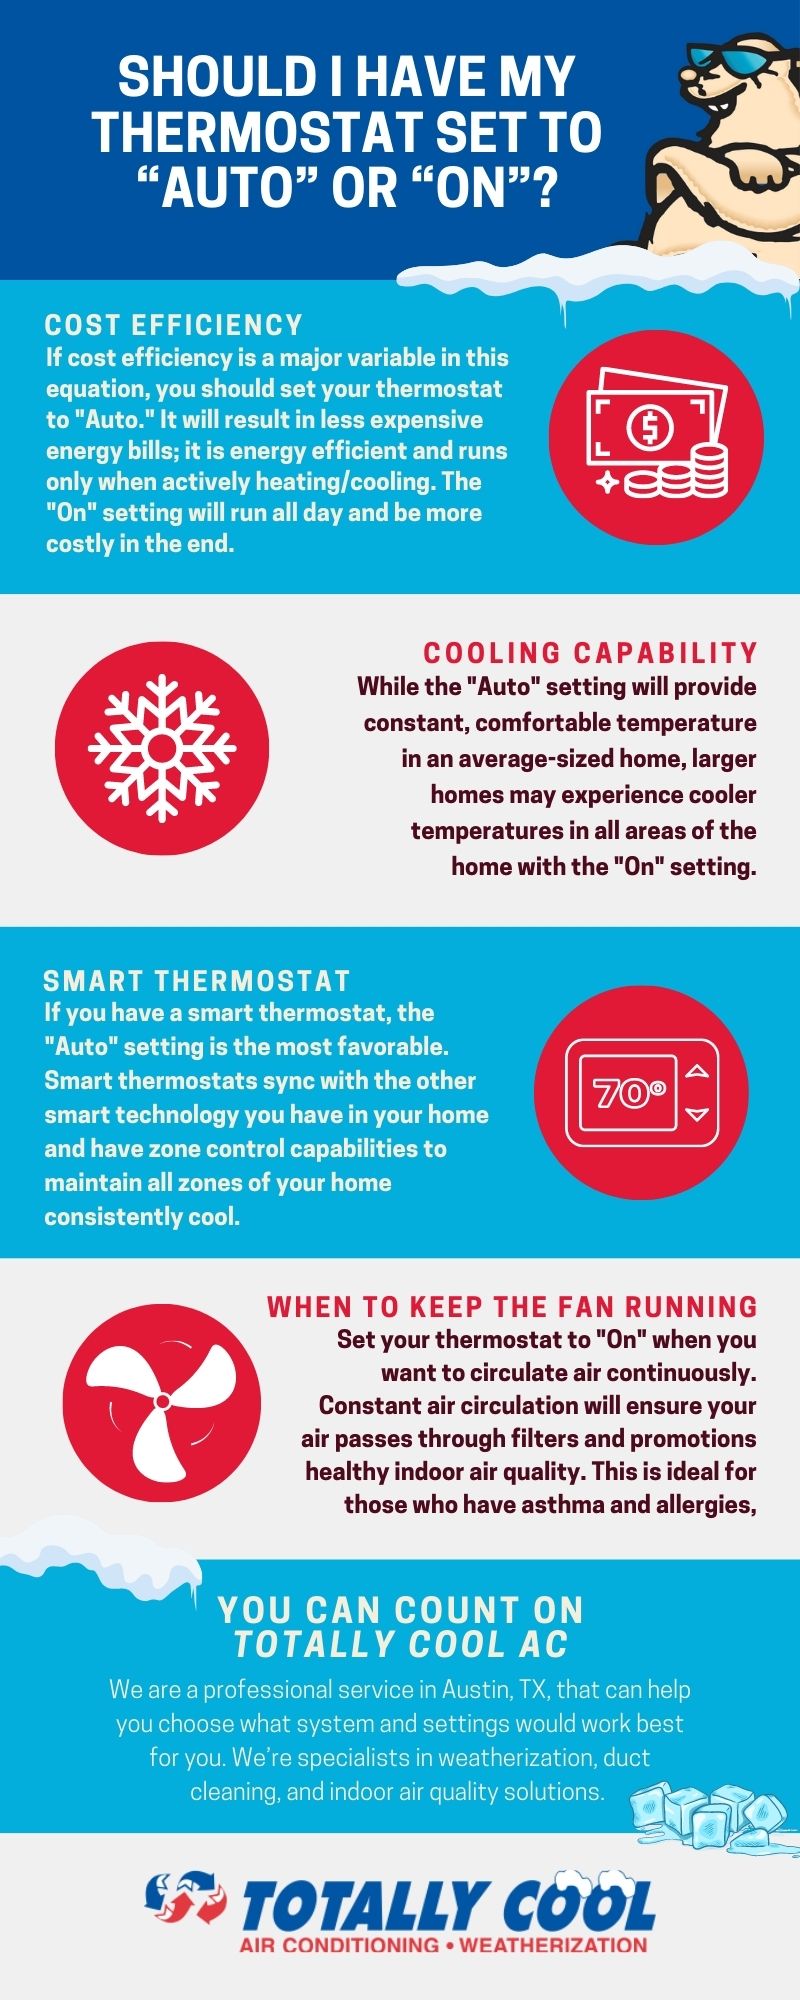 Should I Have My Thermostat Set to Auto or On?